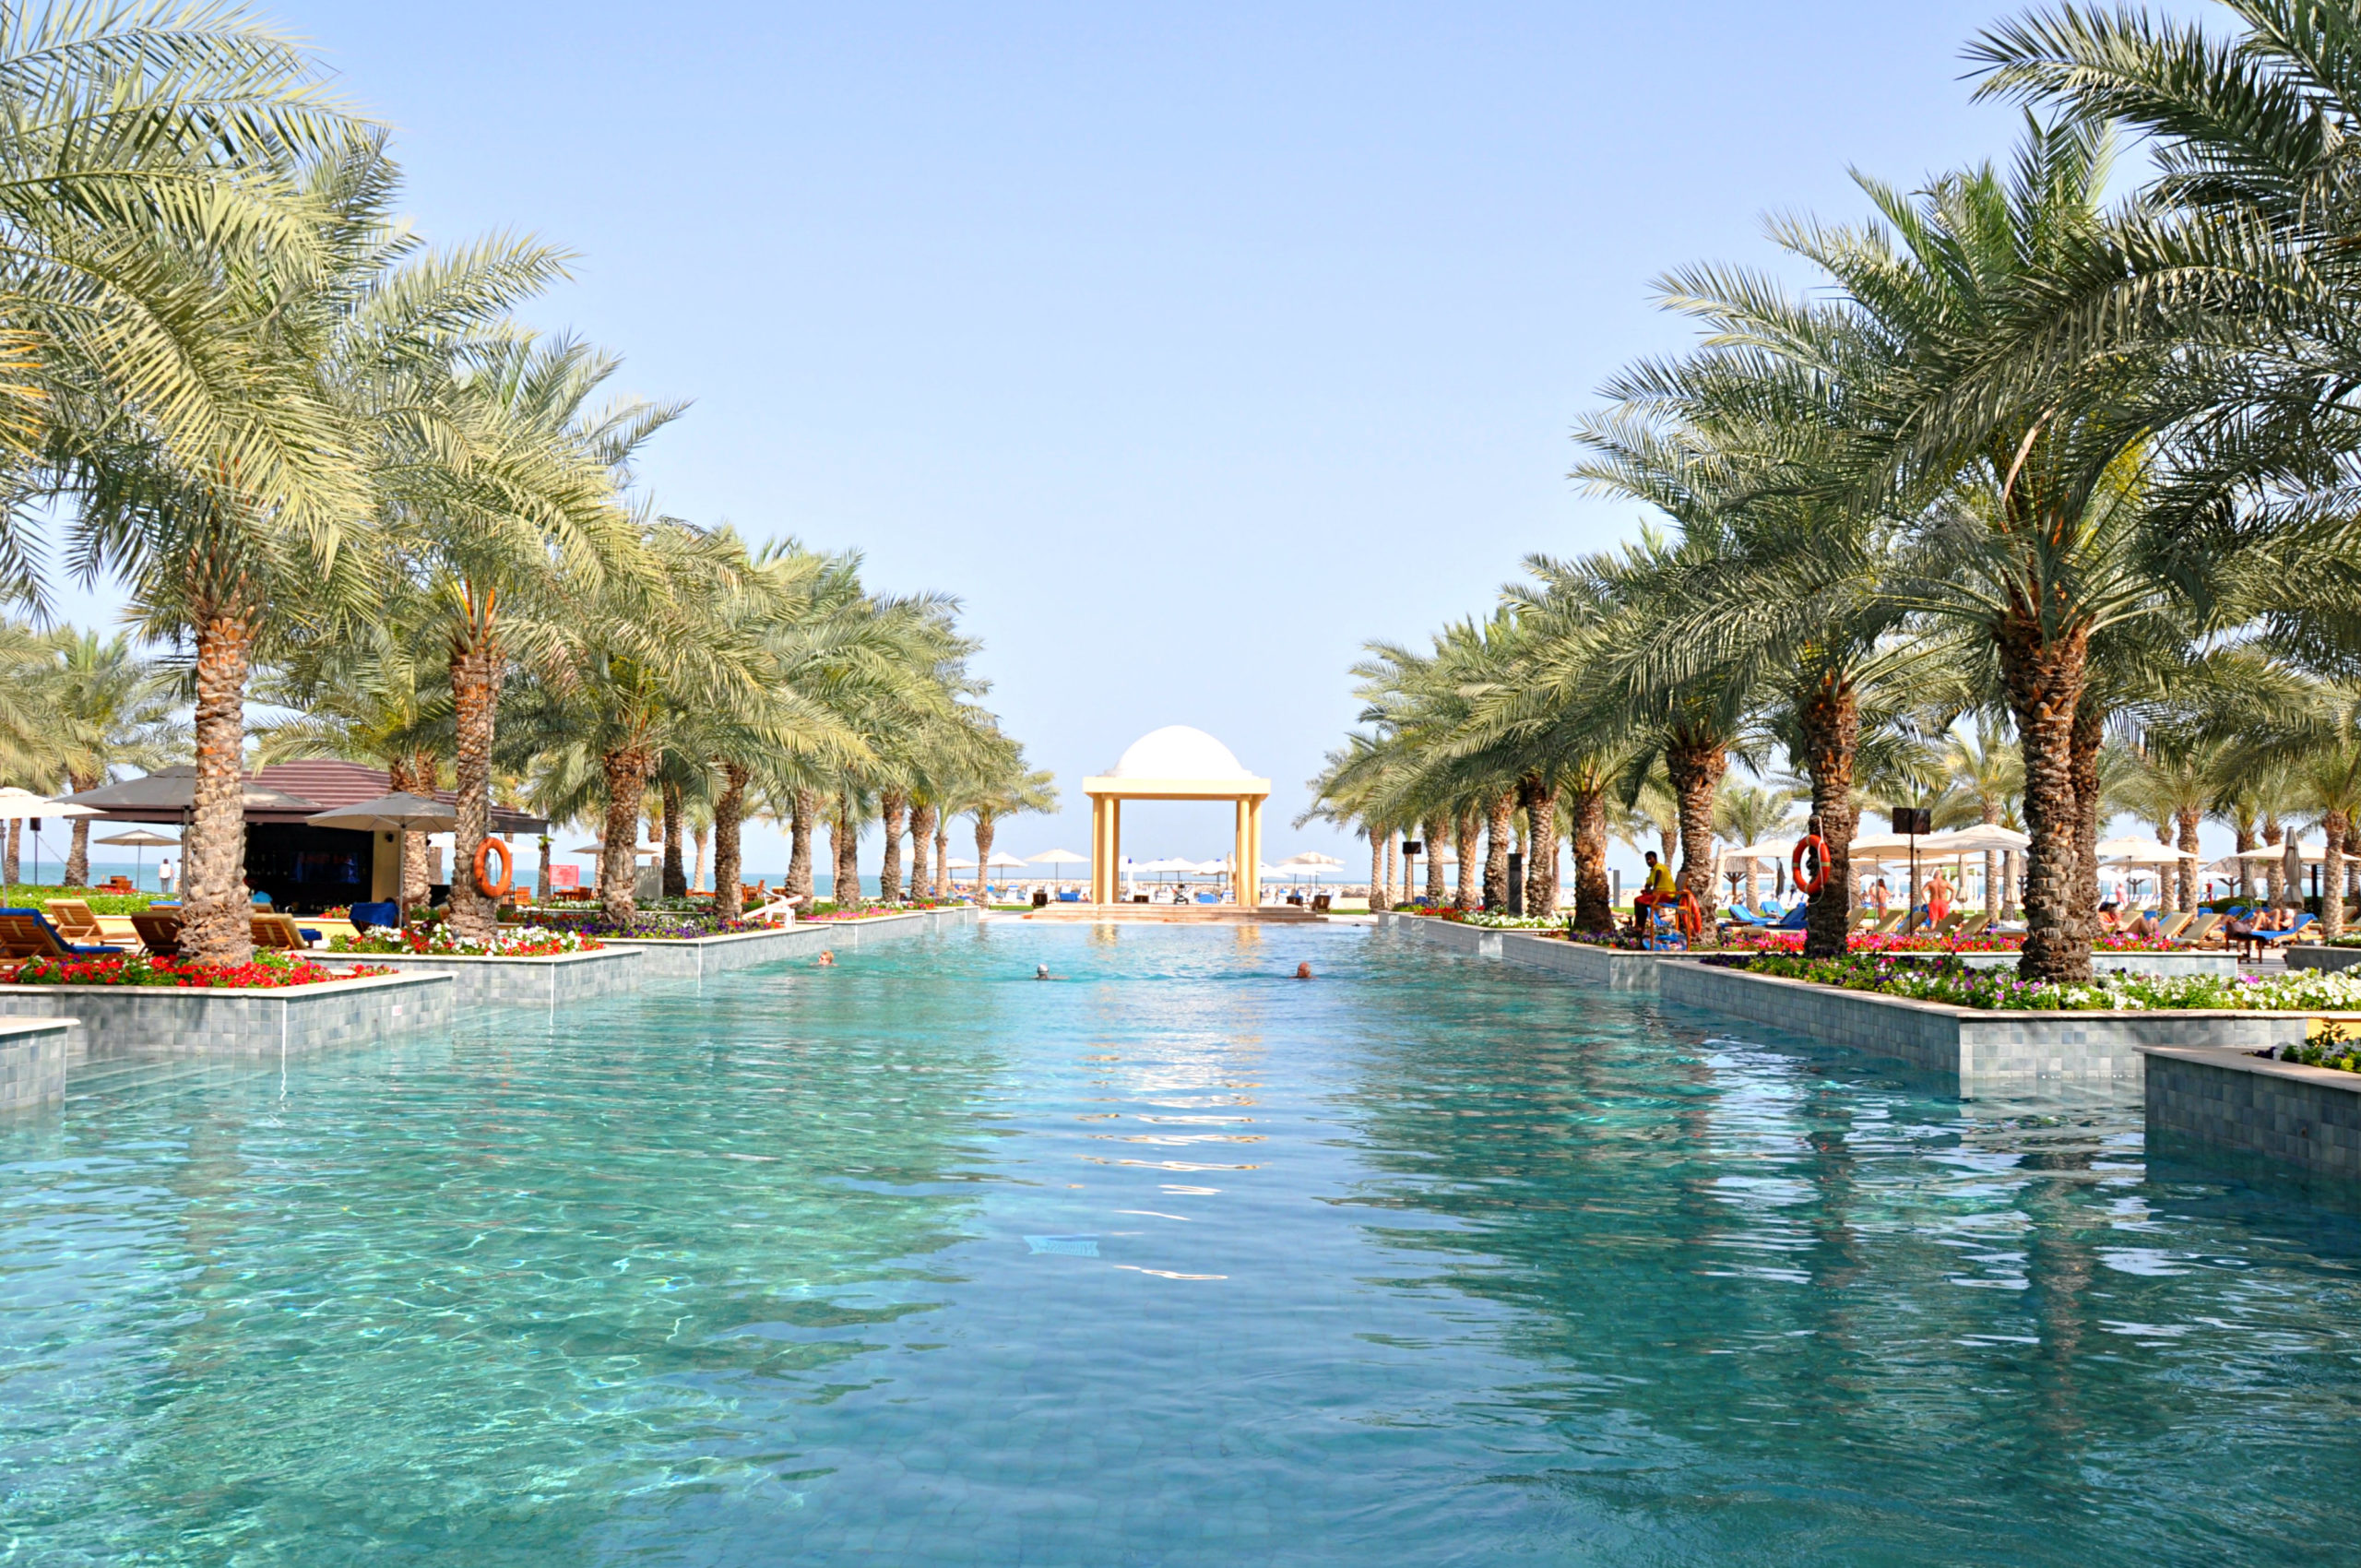 A first-timers guide to Ras Al Khaimah